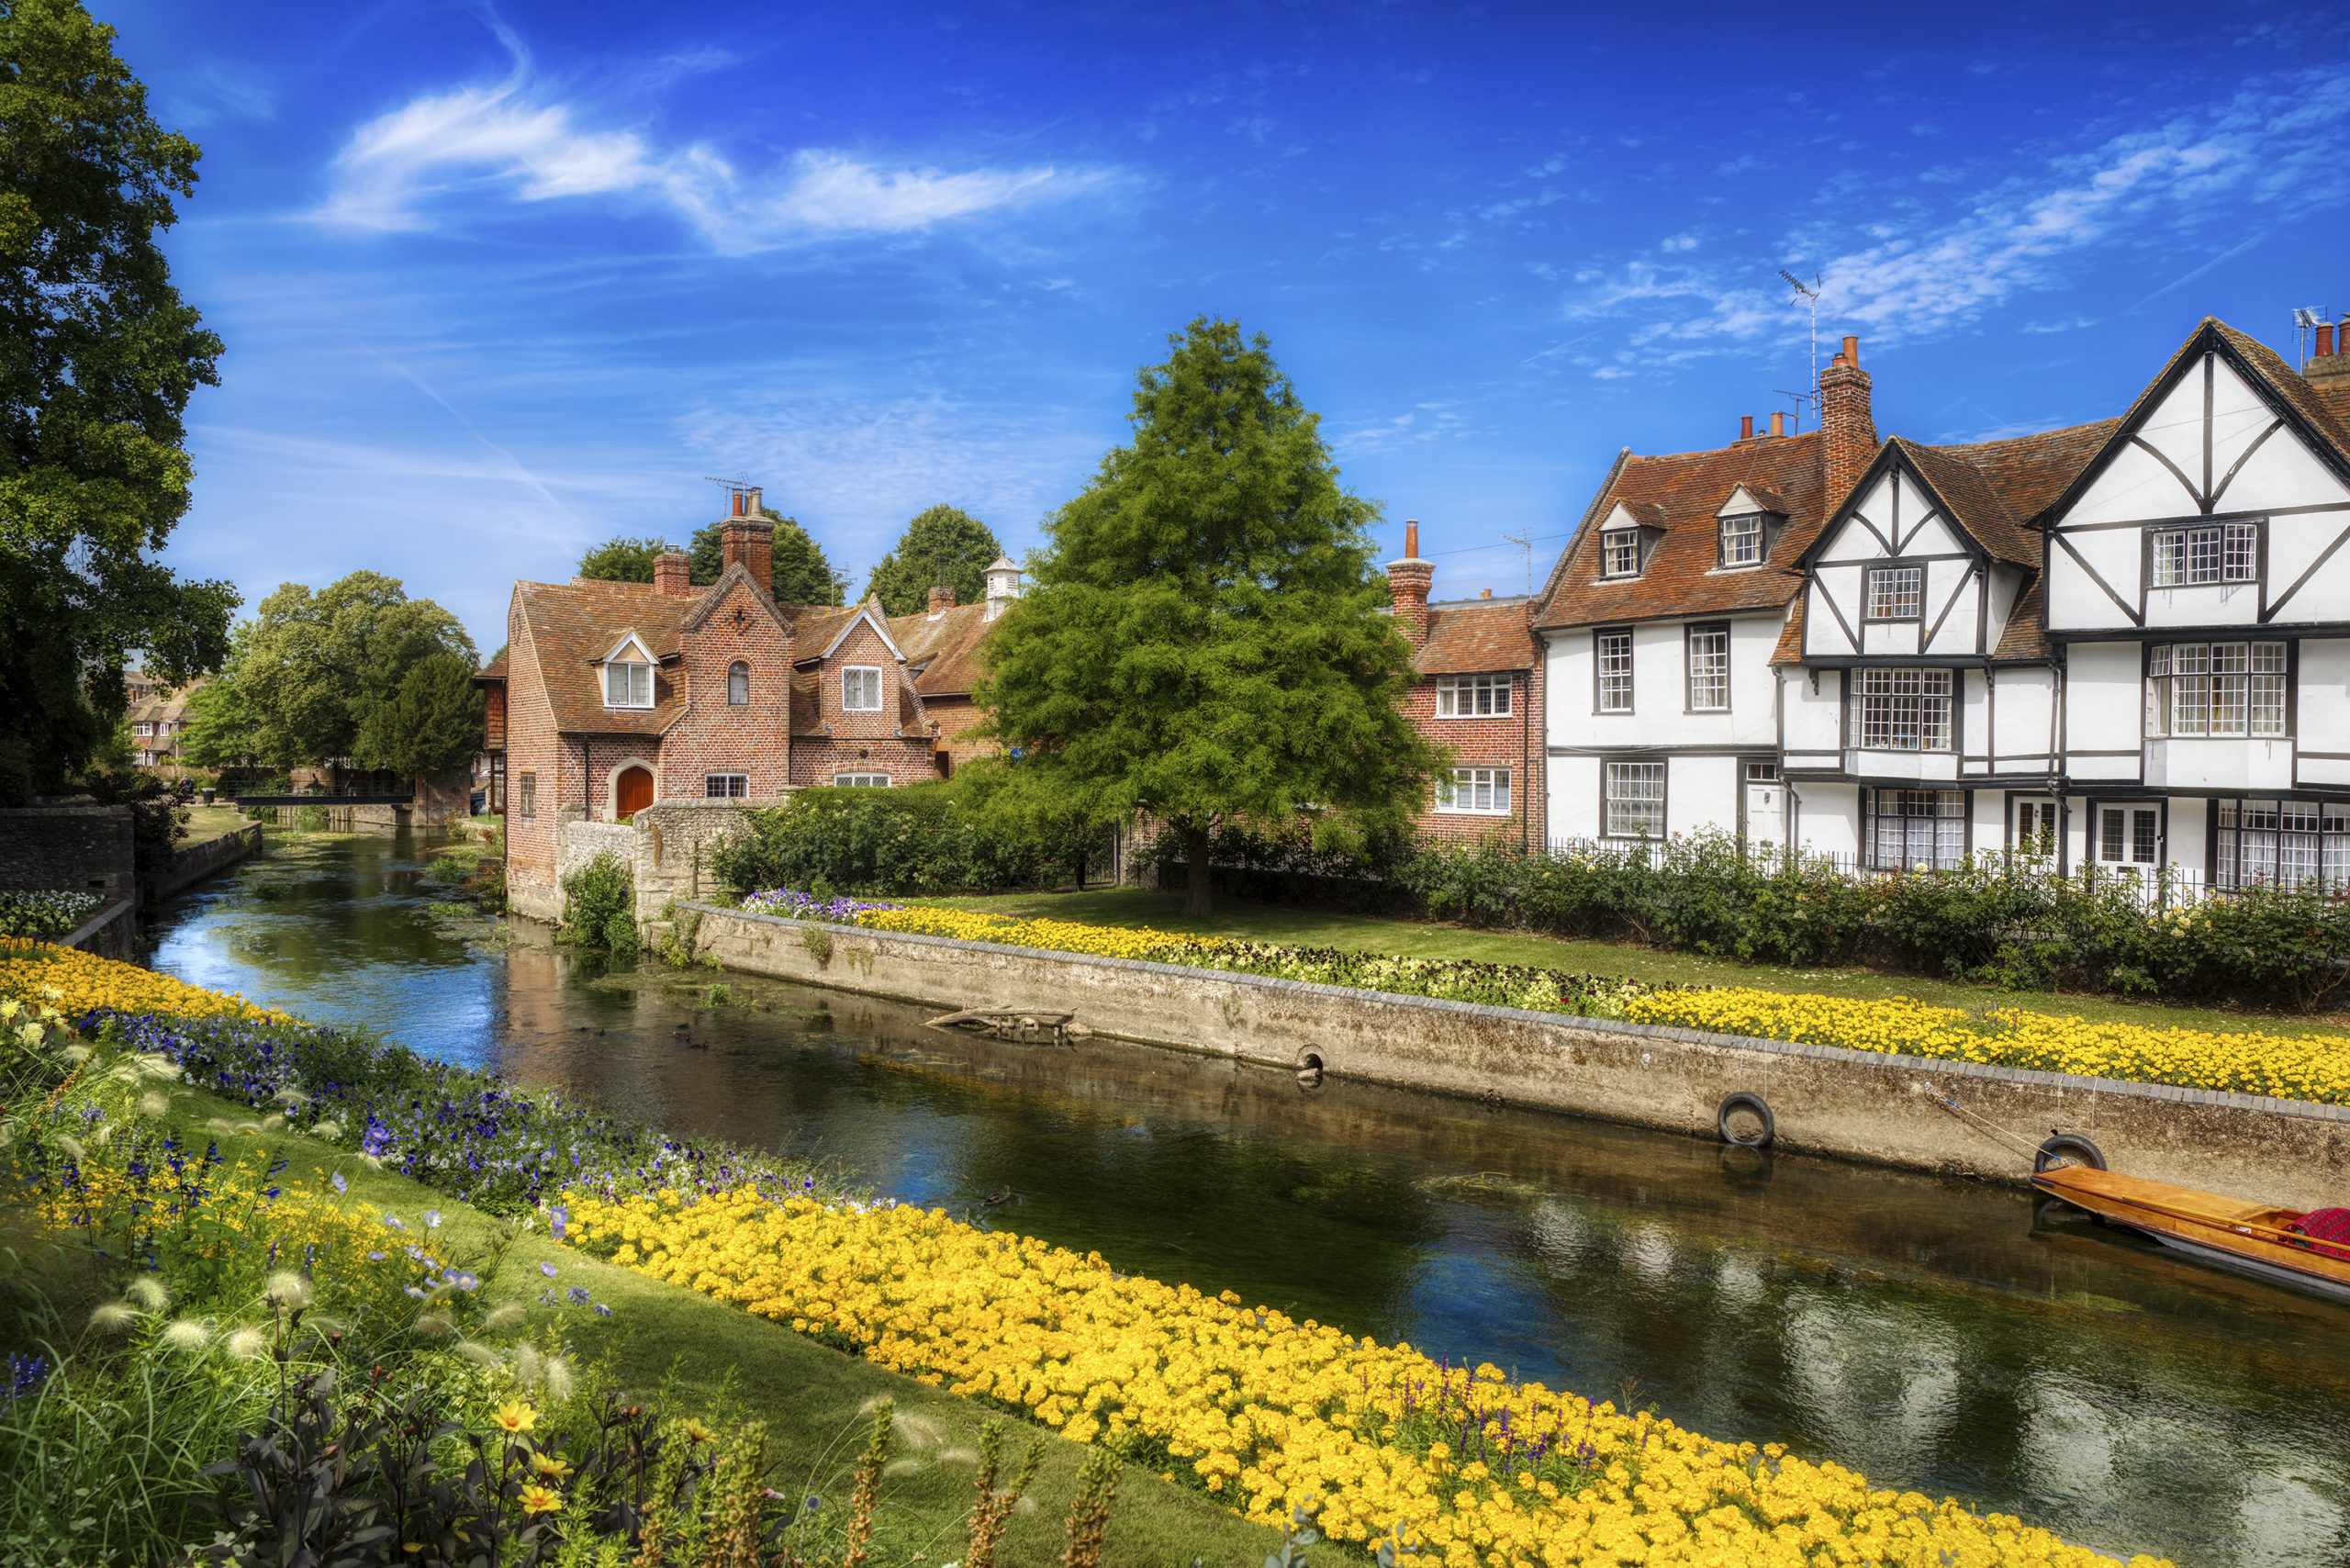 Kent is the Blossoming Beauty of England's Garden